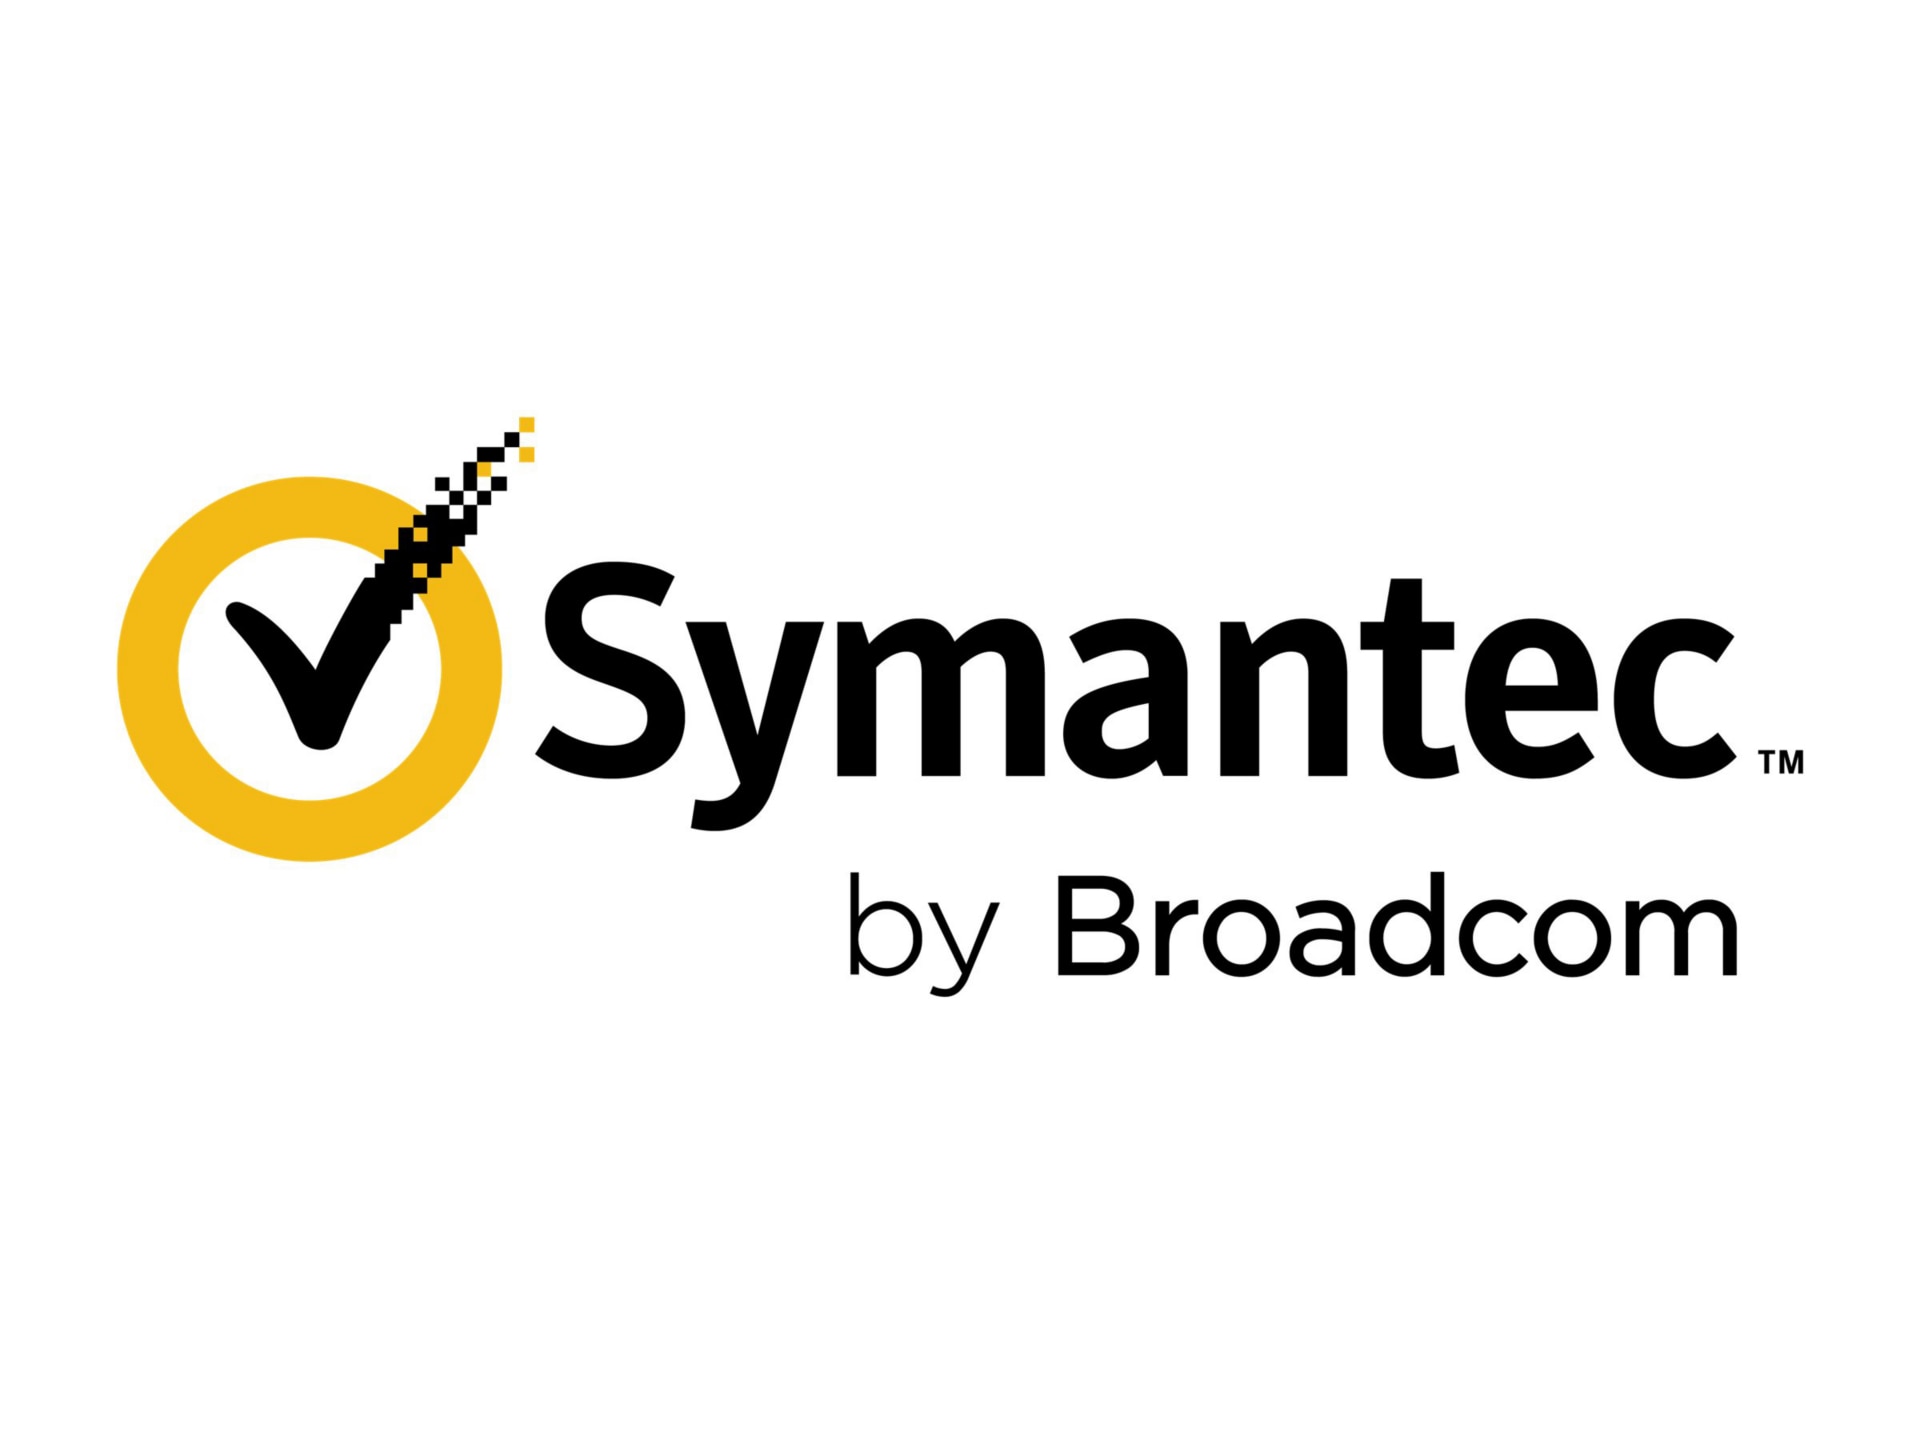 Symantec Validation and ID Protection Service Feitian Authenticator, C200 H41, OTP Time Based Token - security smart